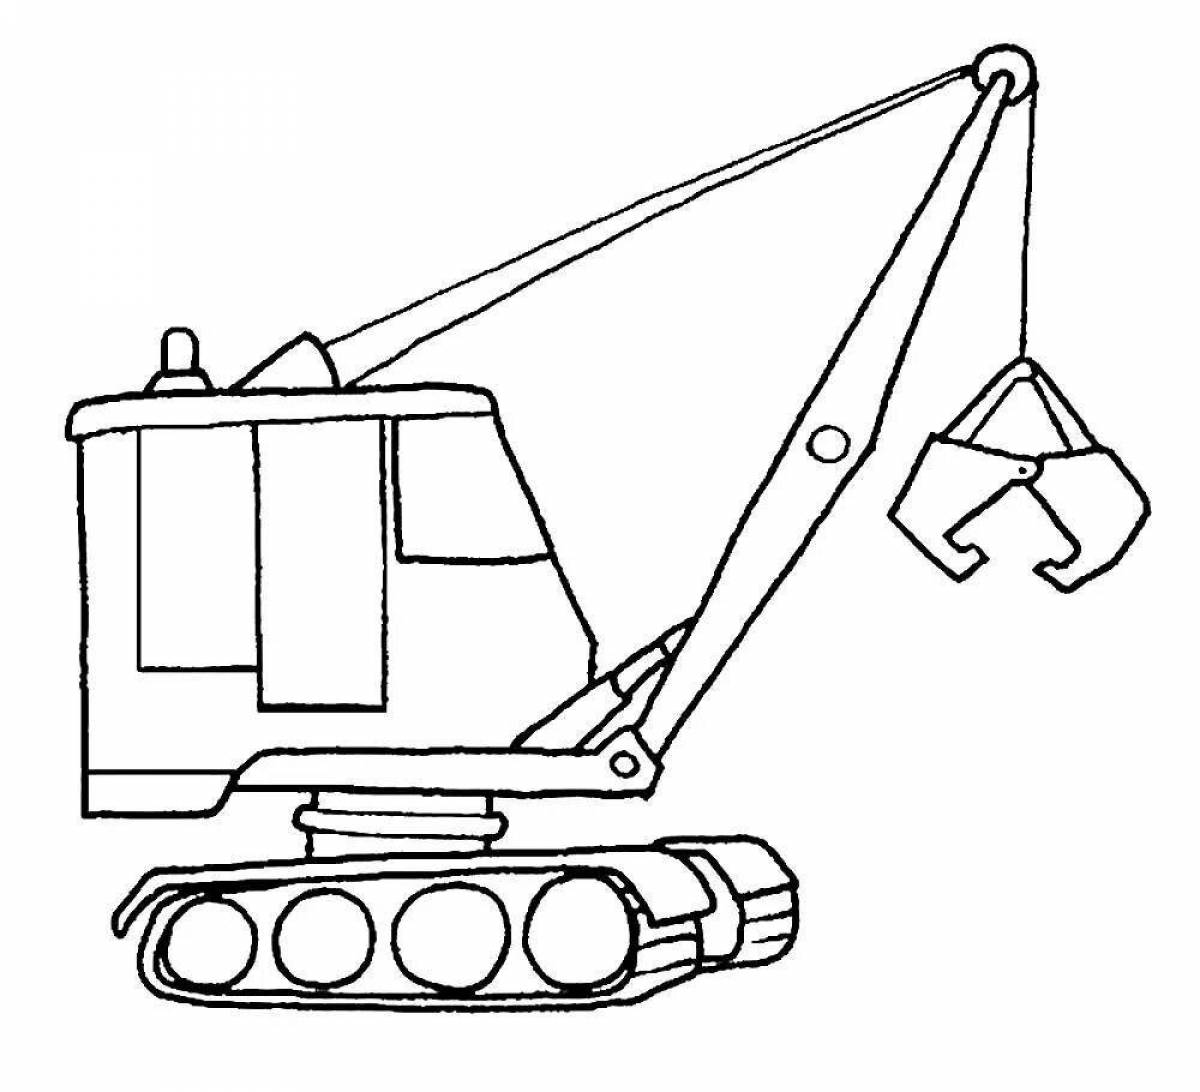 Innovative construction vehicles coloring pages for boys